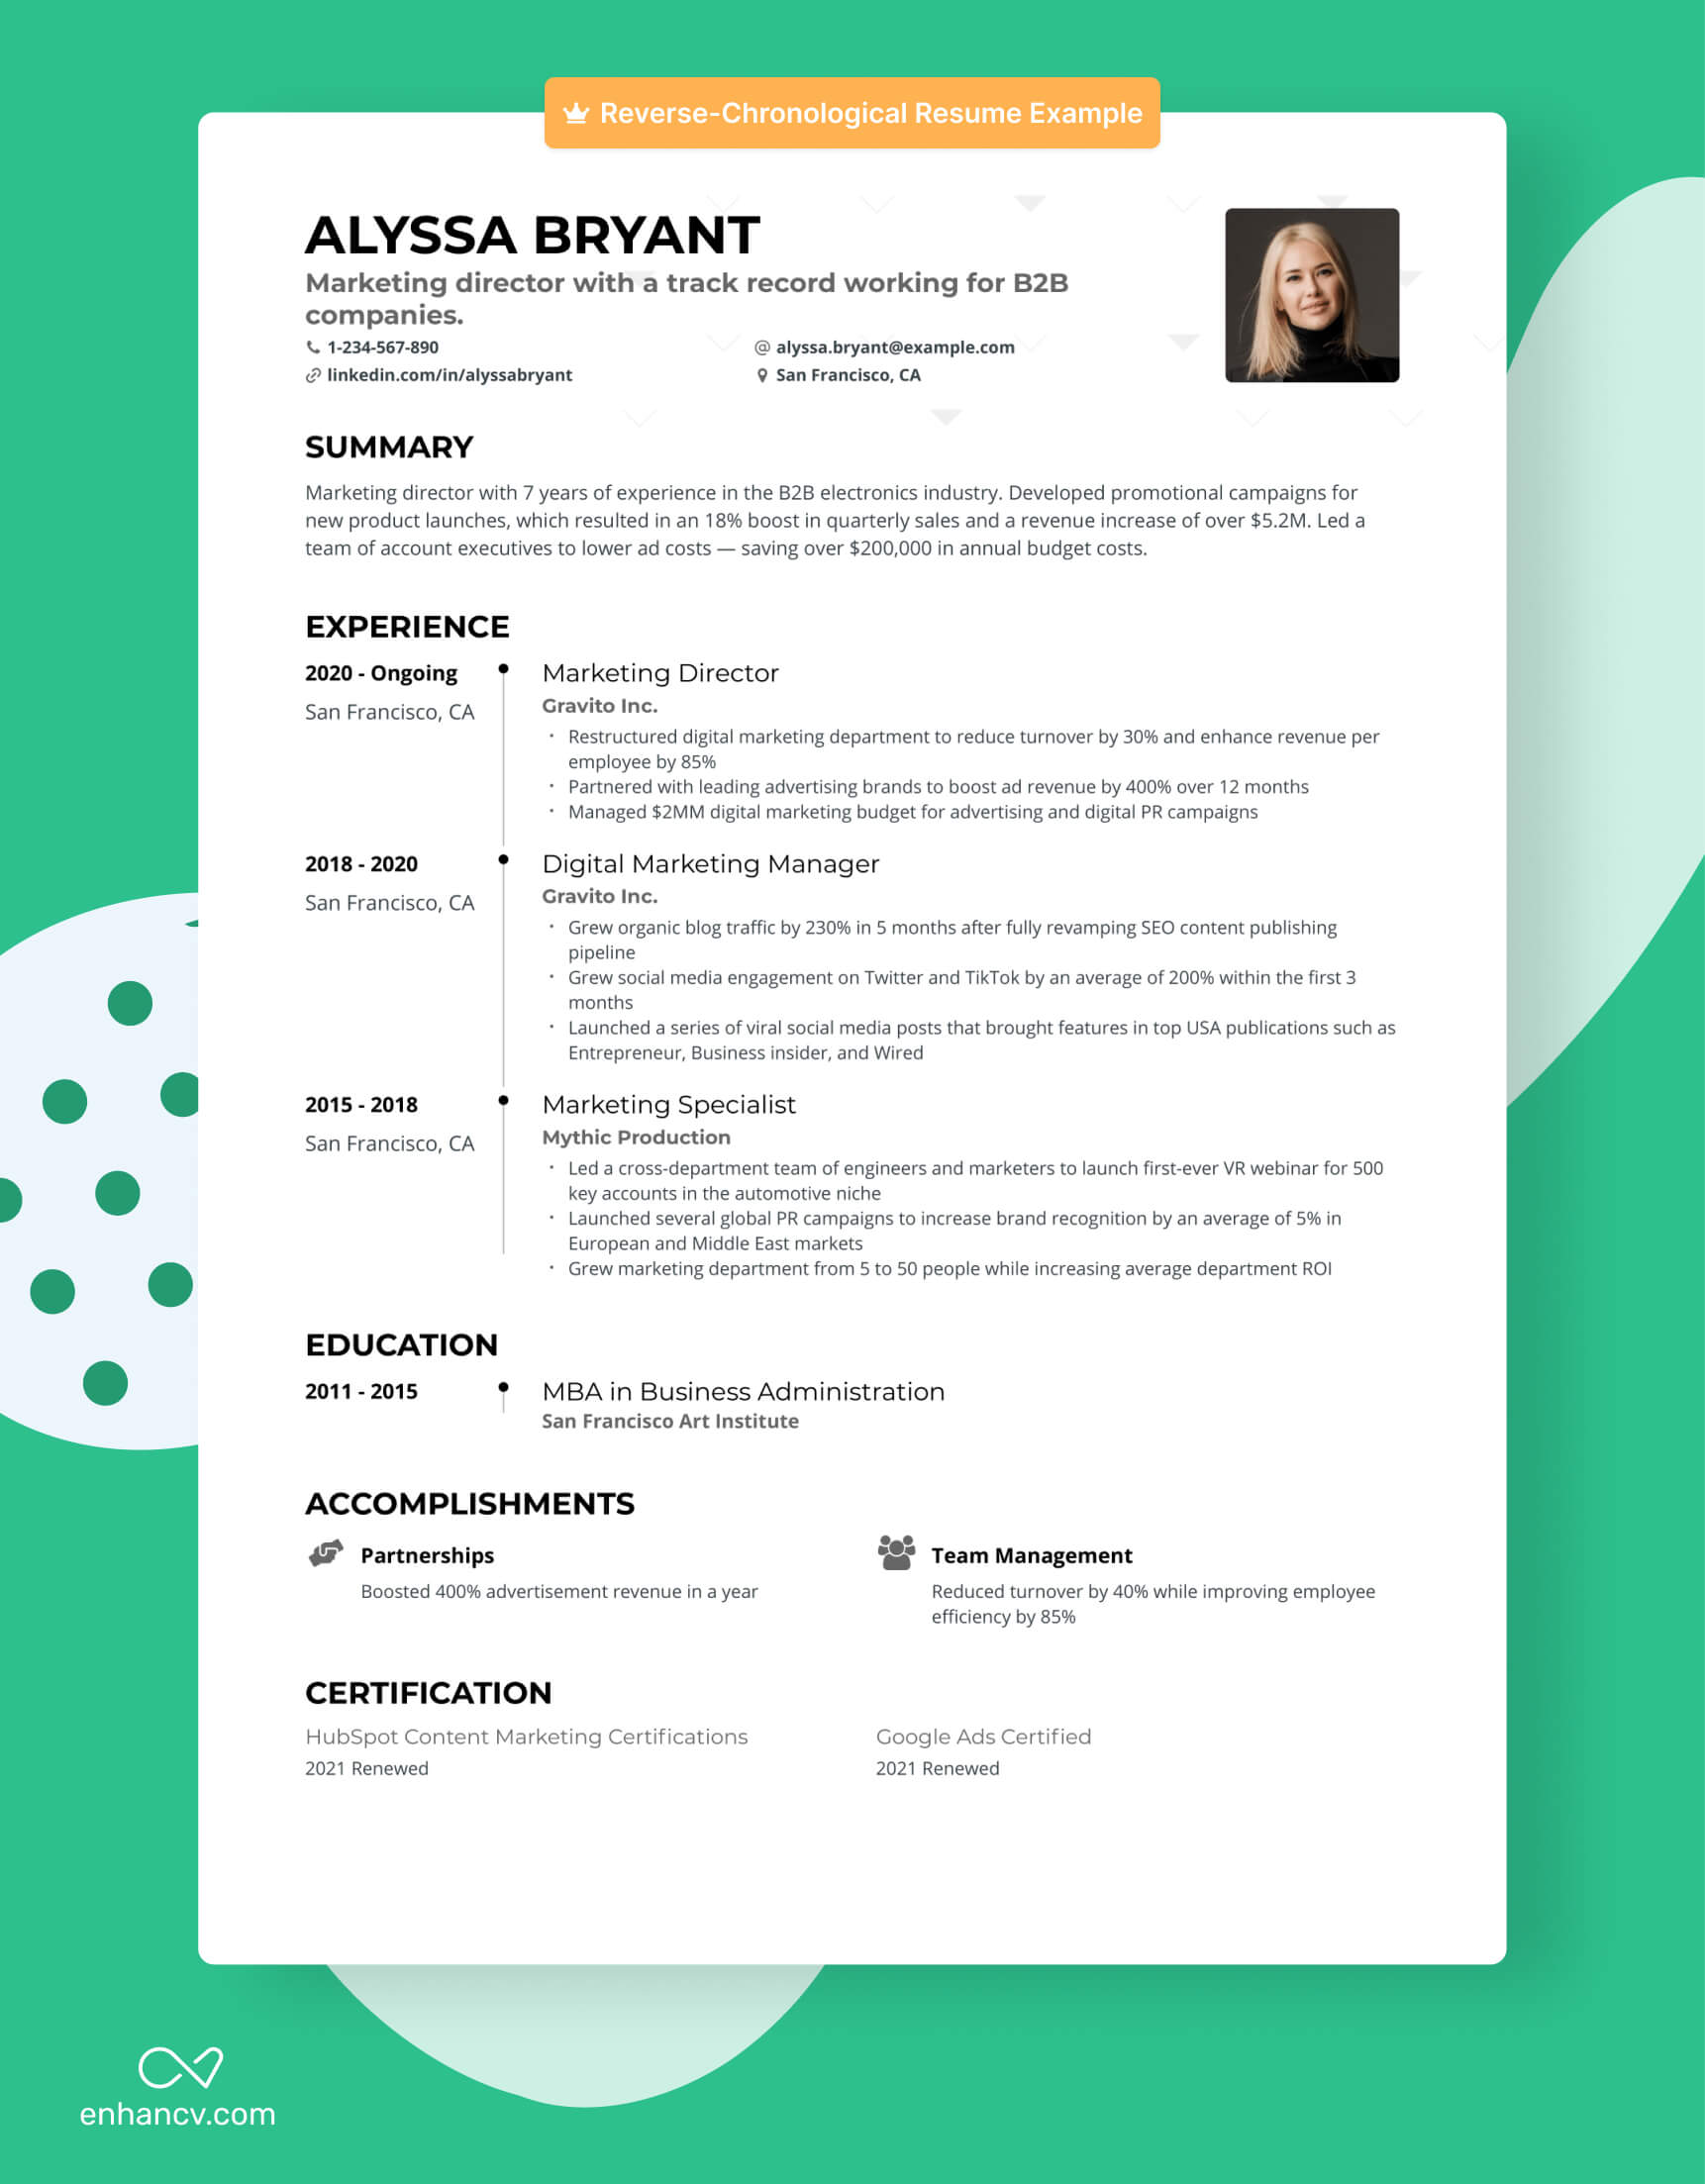 chronological resume example how to start a resume background.jpg